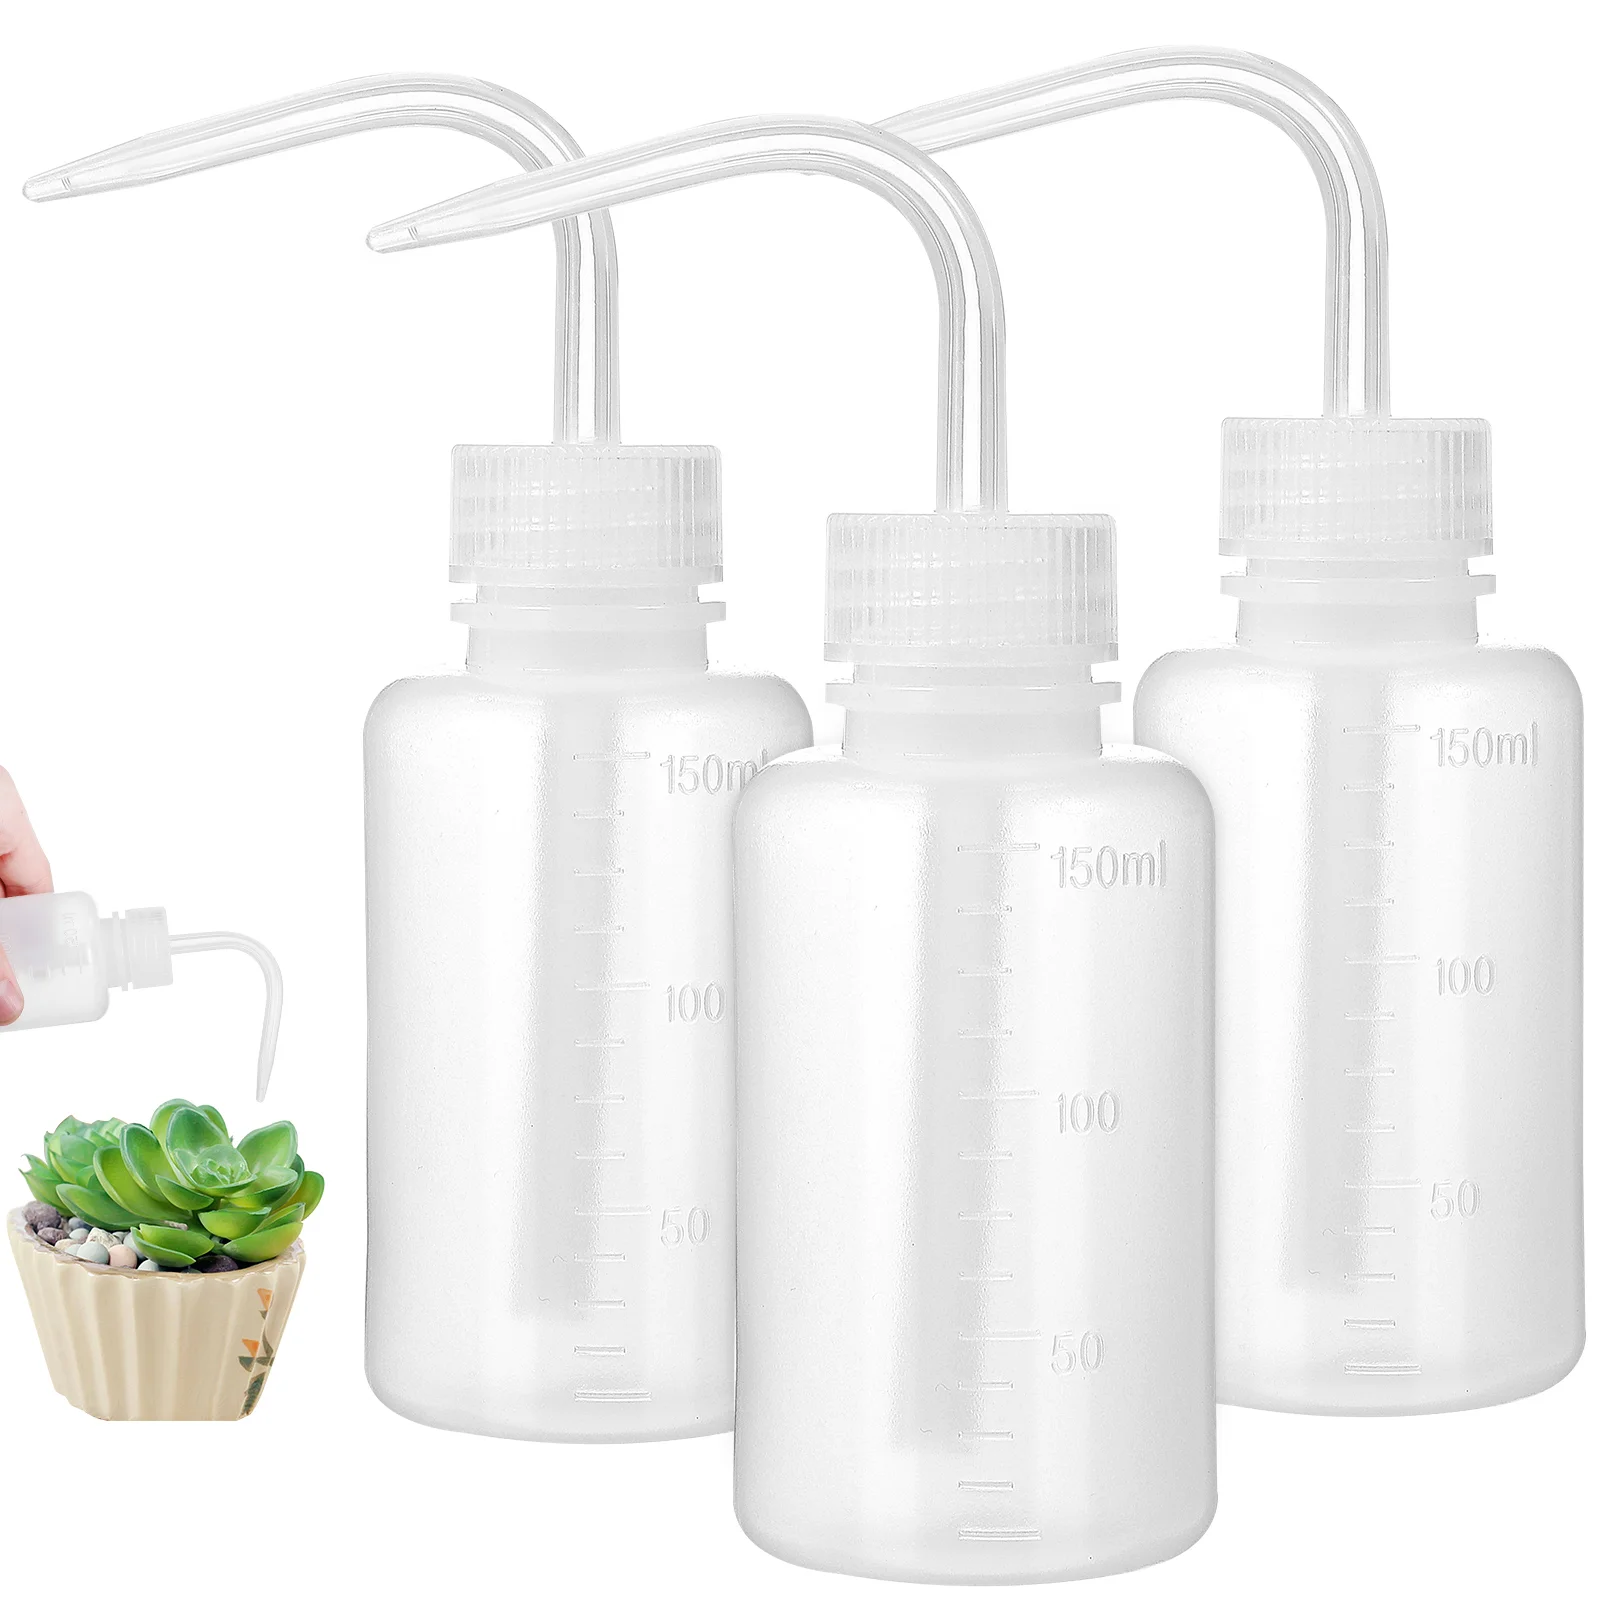 

3 Pcs Wash Bottle Plastic Squeeze Bottles Watering Tools for Succulent Plants Experiment Tattoo Supplies